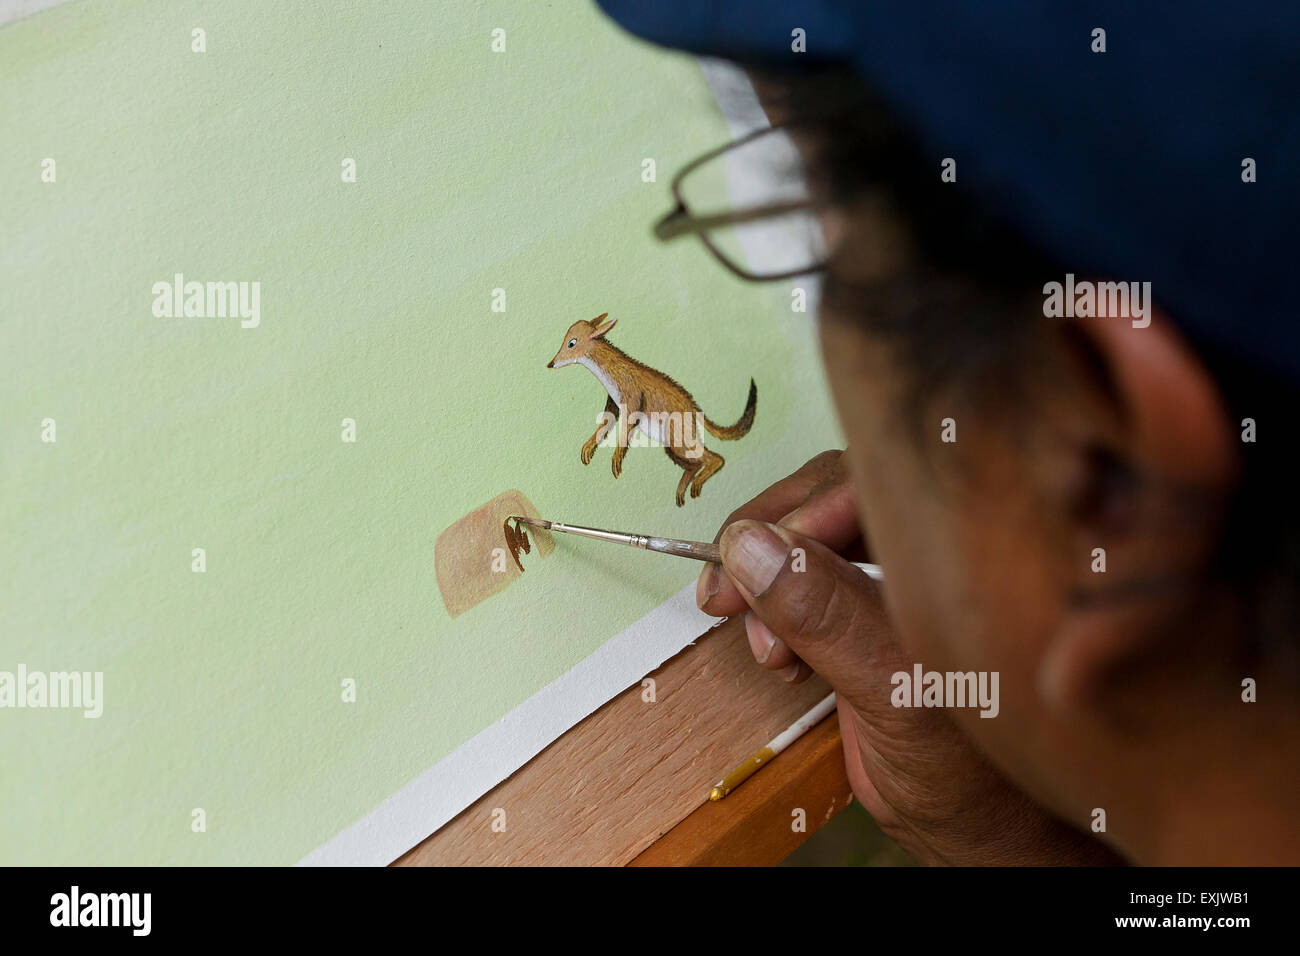 Man painting animal character on paper Stock Photo